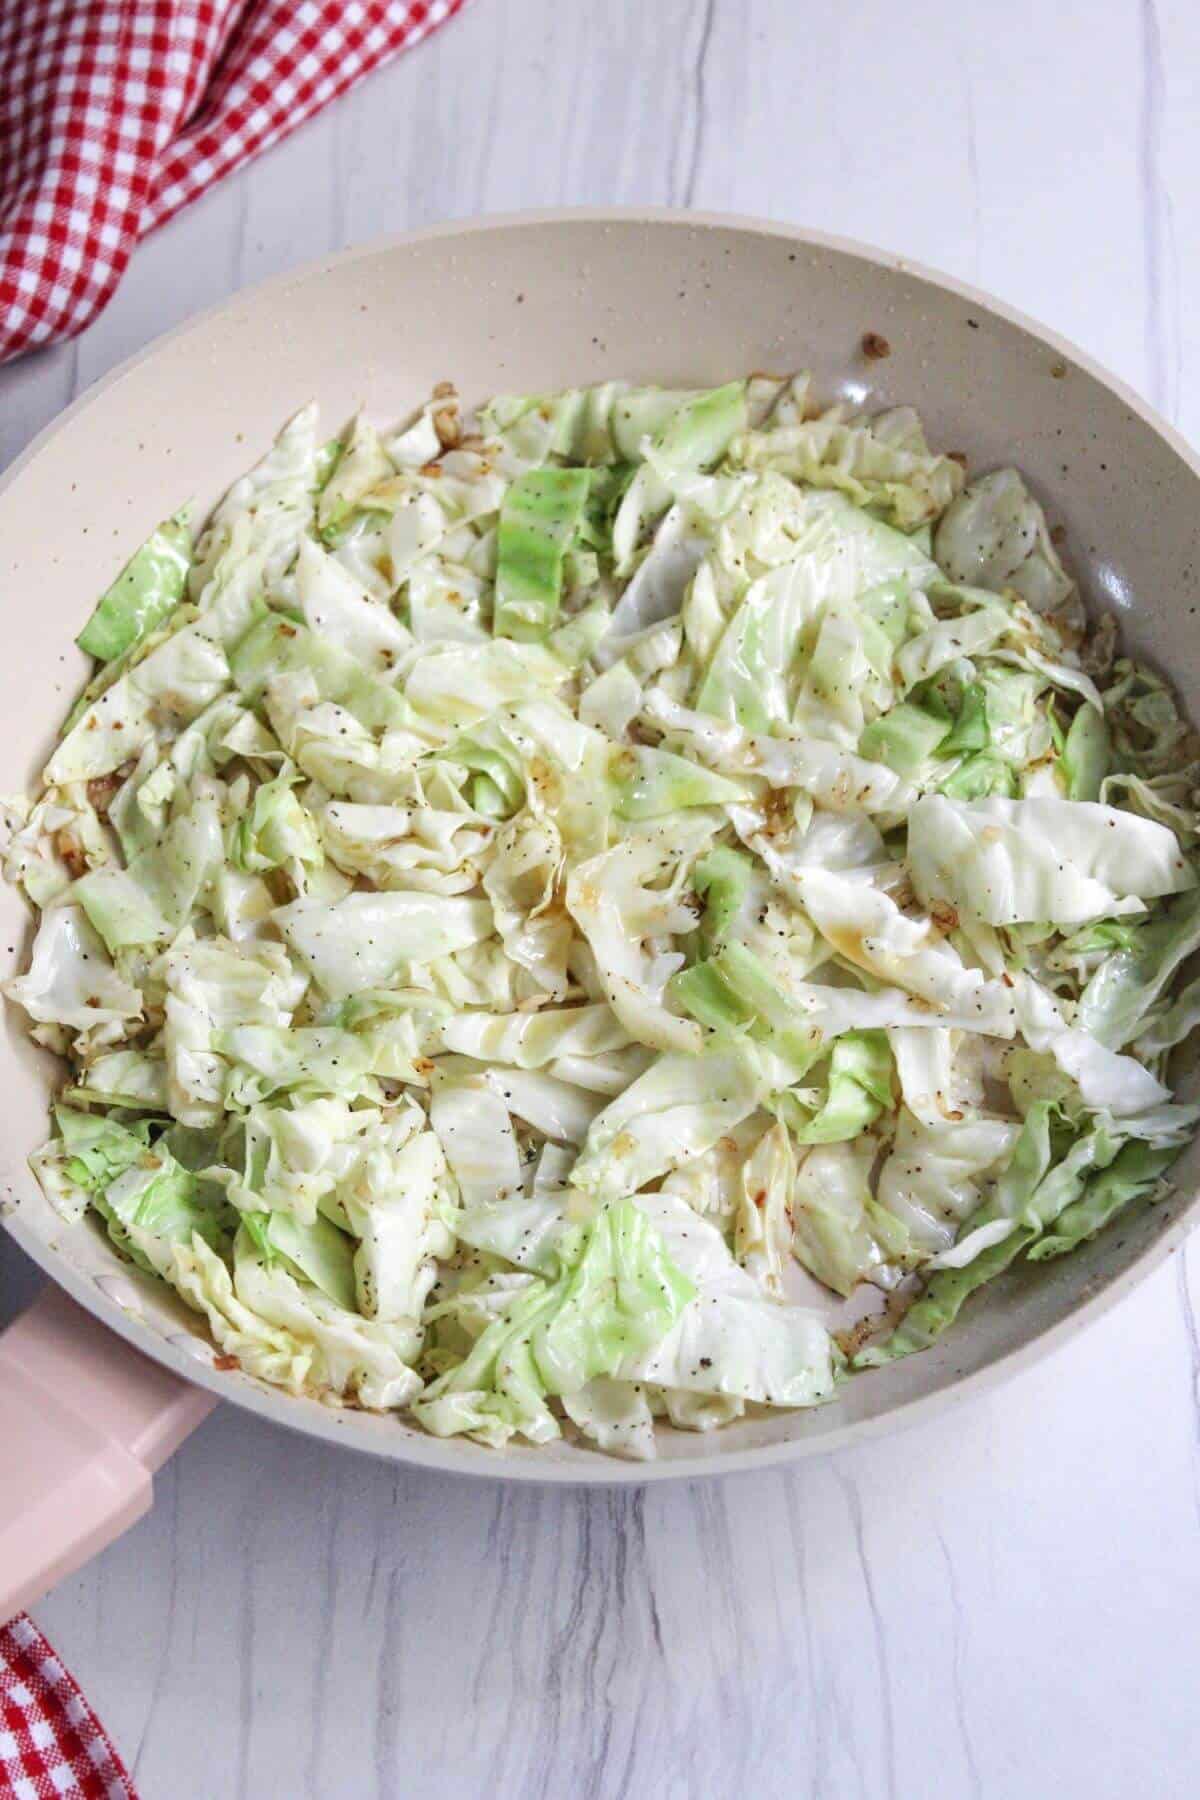 Seasonings added to cabbage.